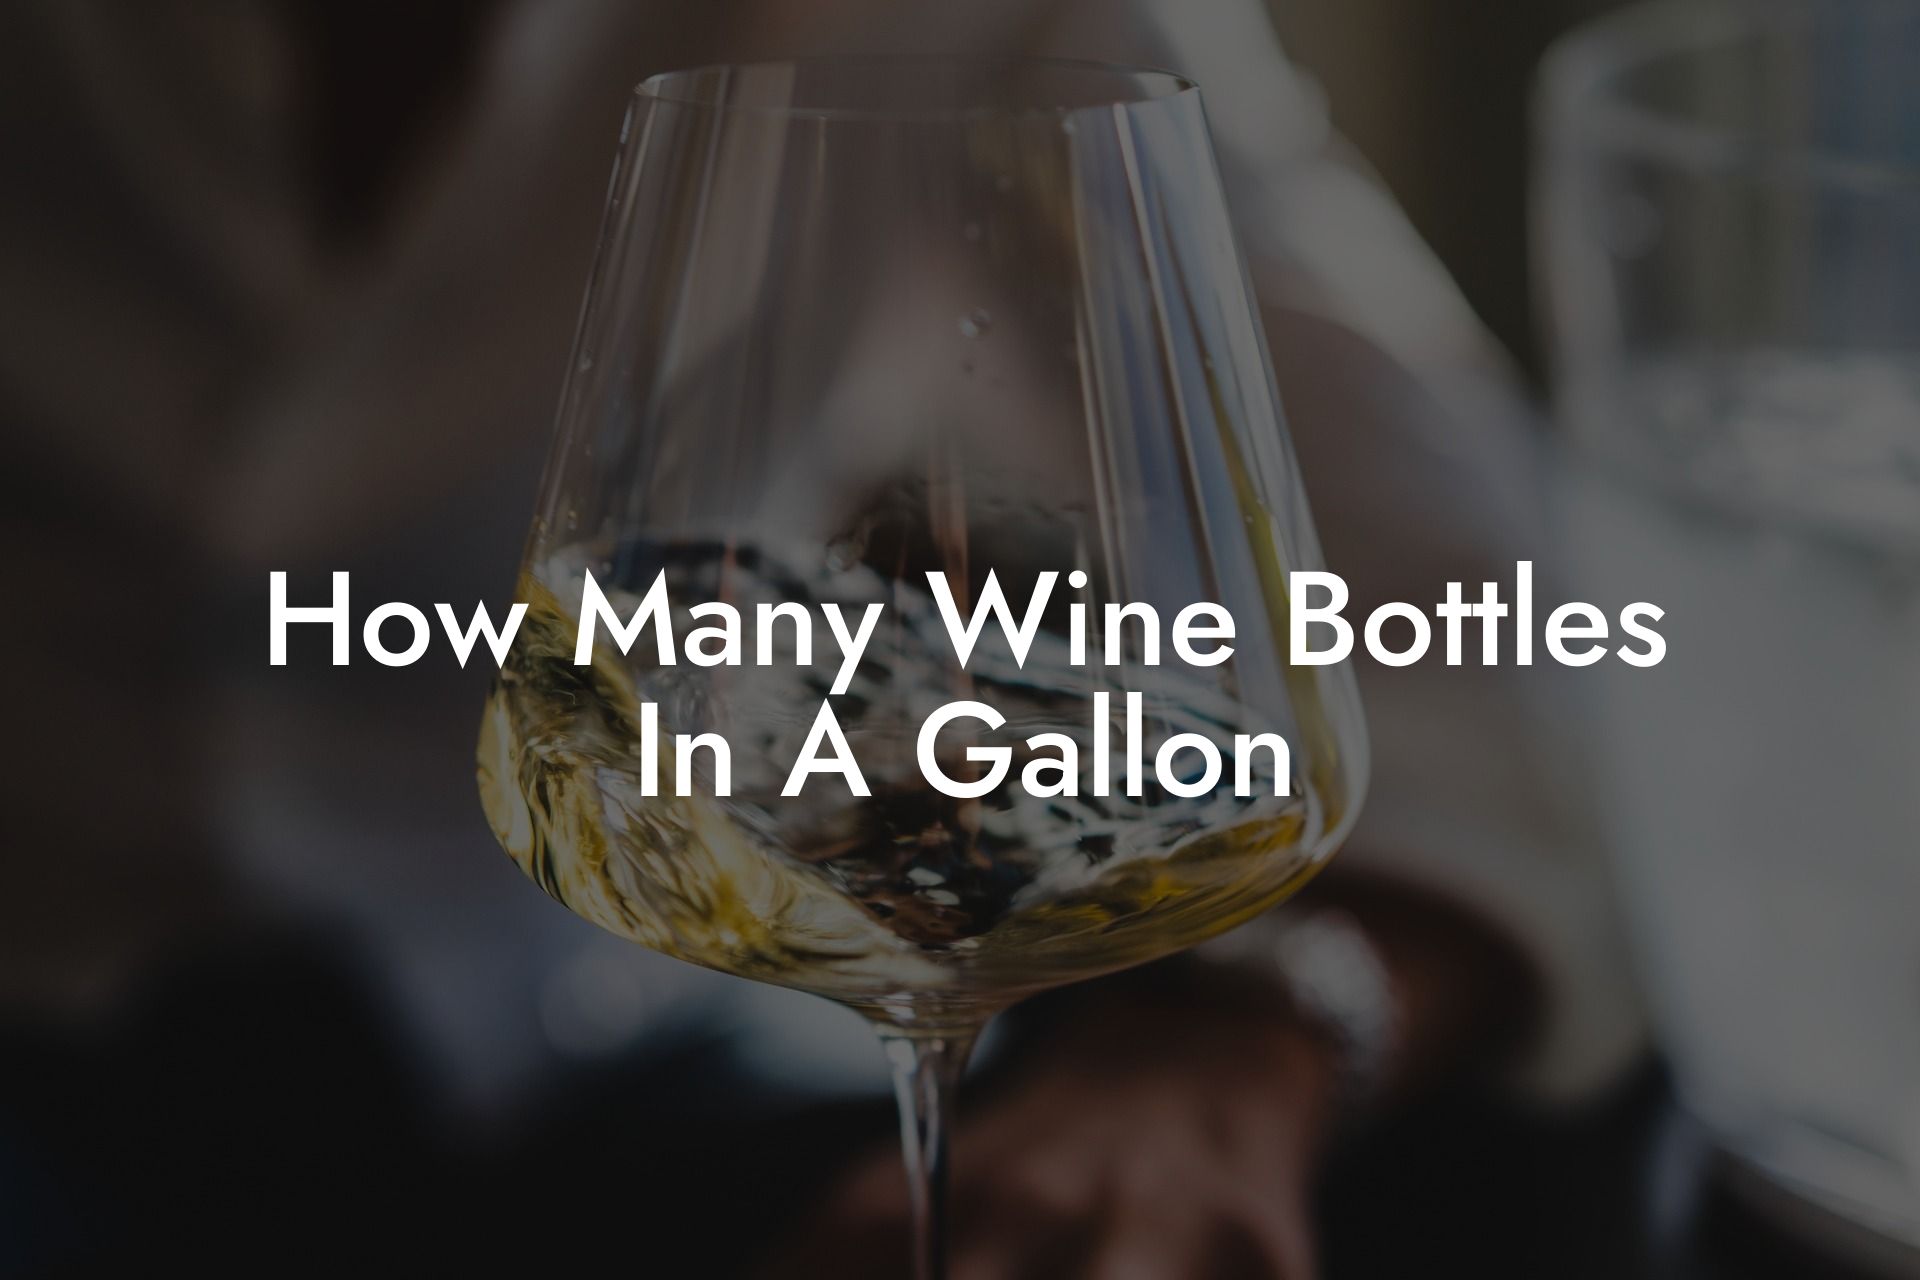 How Many Wine Bottles In A Gallon